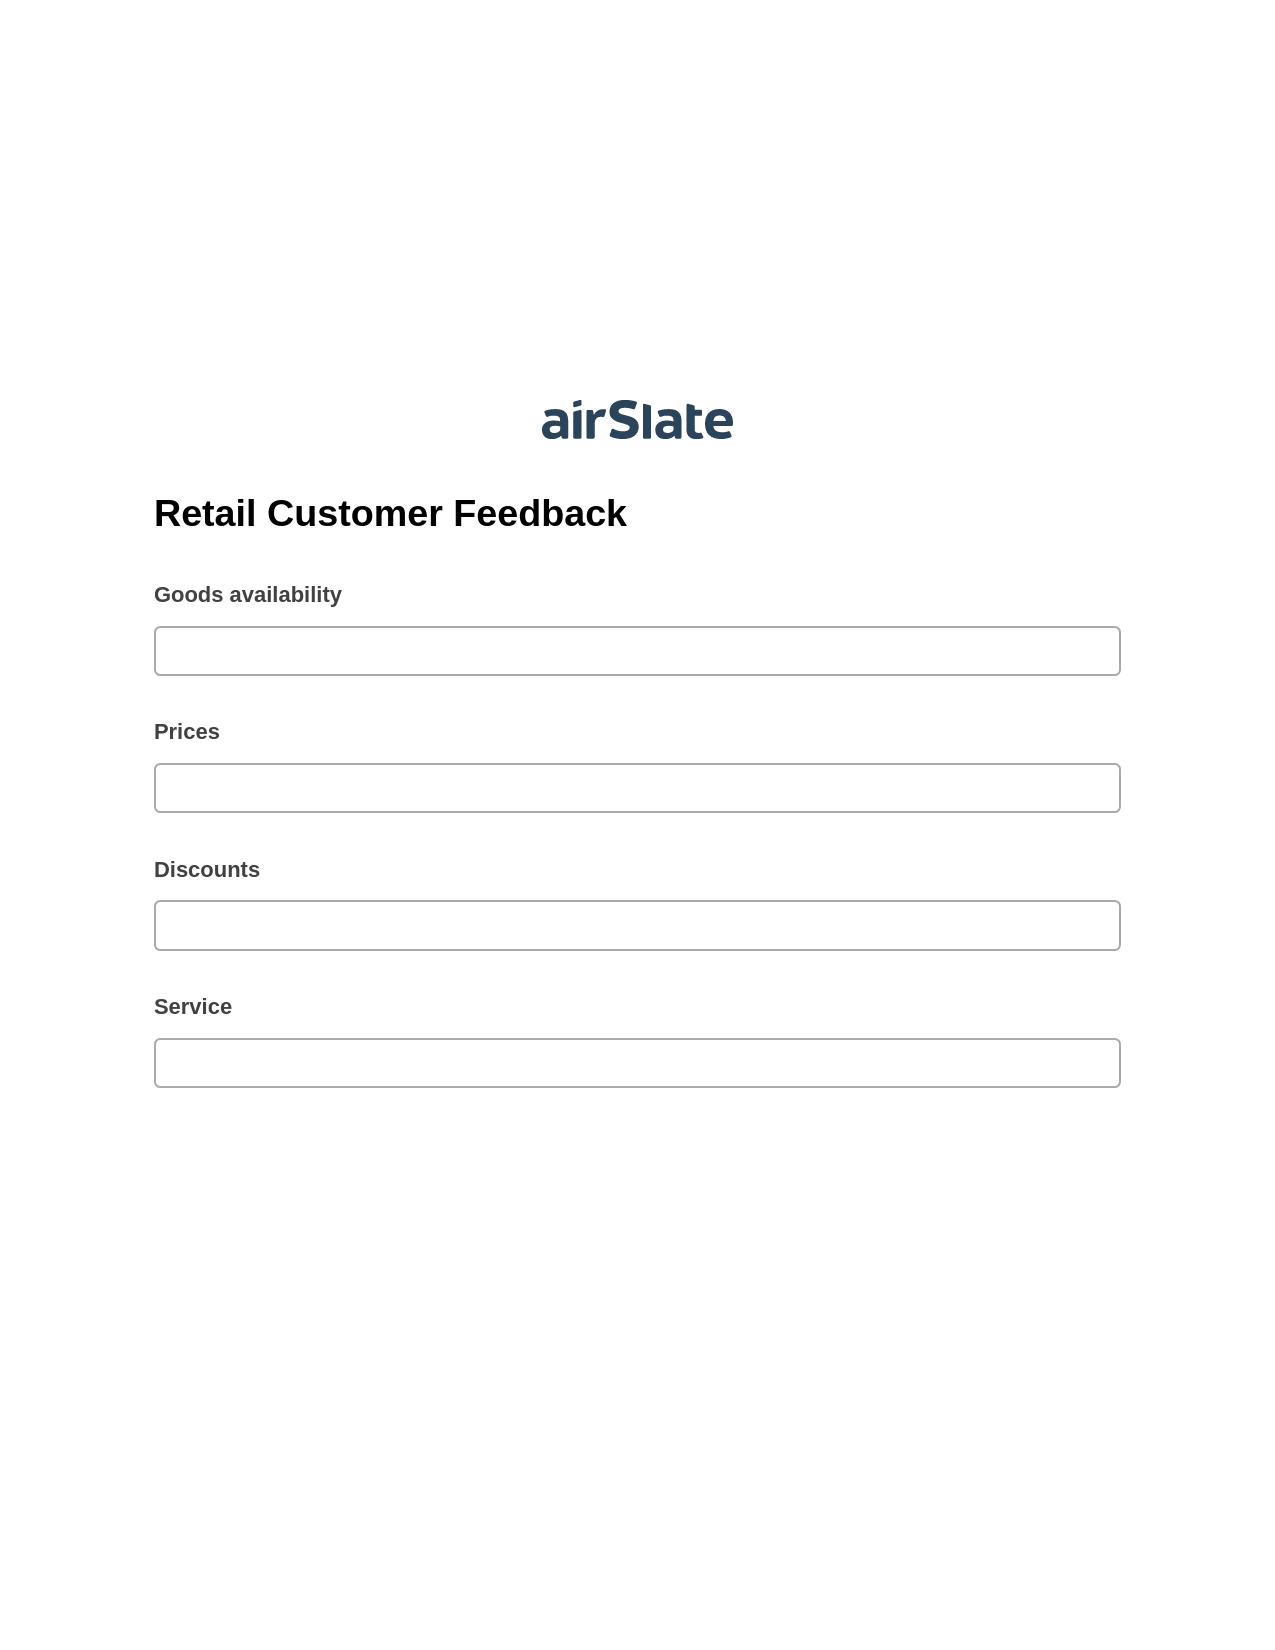 Retail Customer Feedback Pre-fill from Excel Spreadsheet Bot, Lock the slate bot, Export to Salesforce Bot